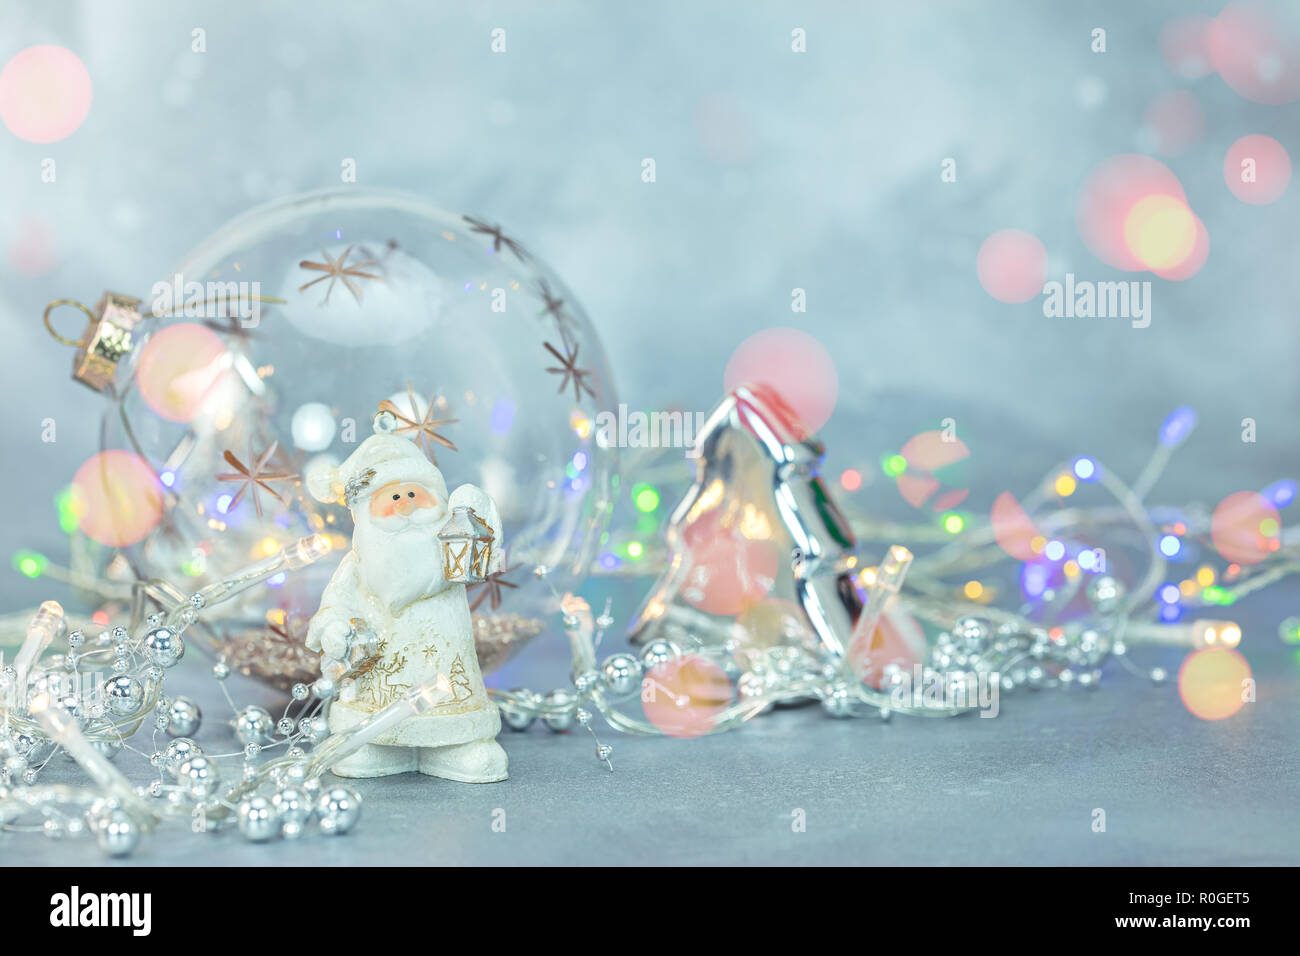 christmas decorations on blue frosty background. glowing light garlands, christmas tree balls and toys Stock Photo